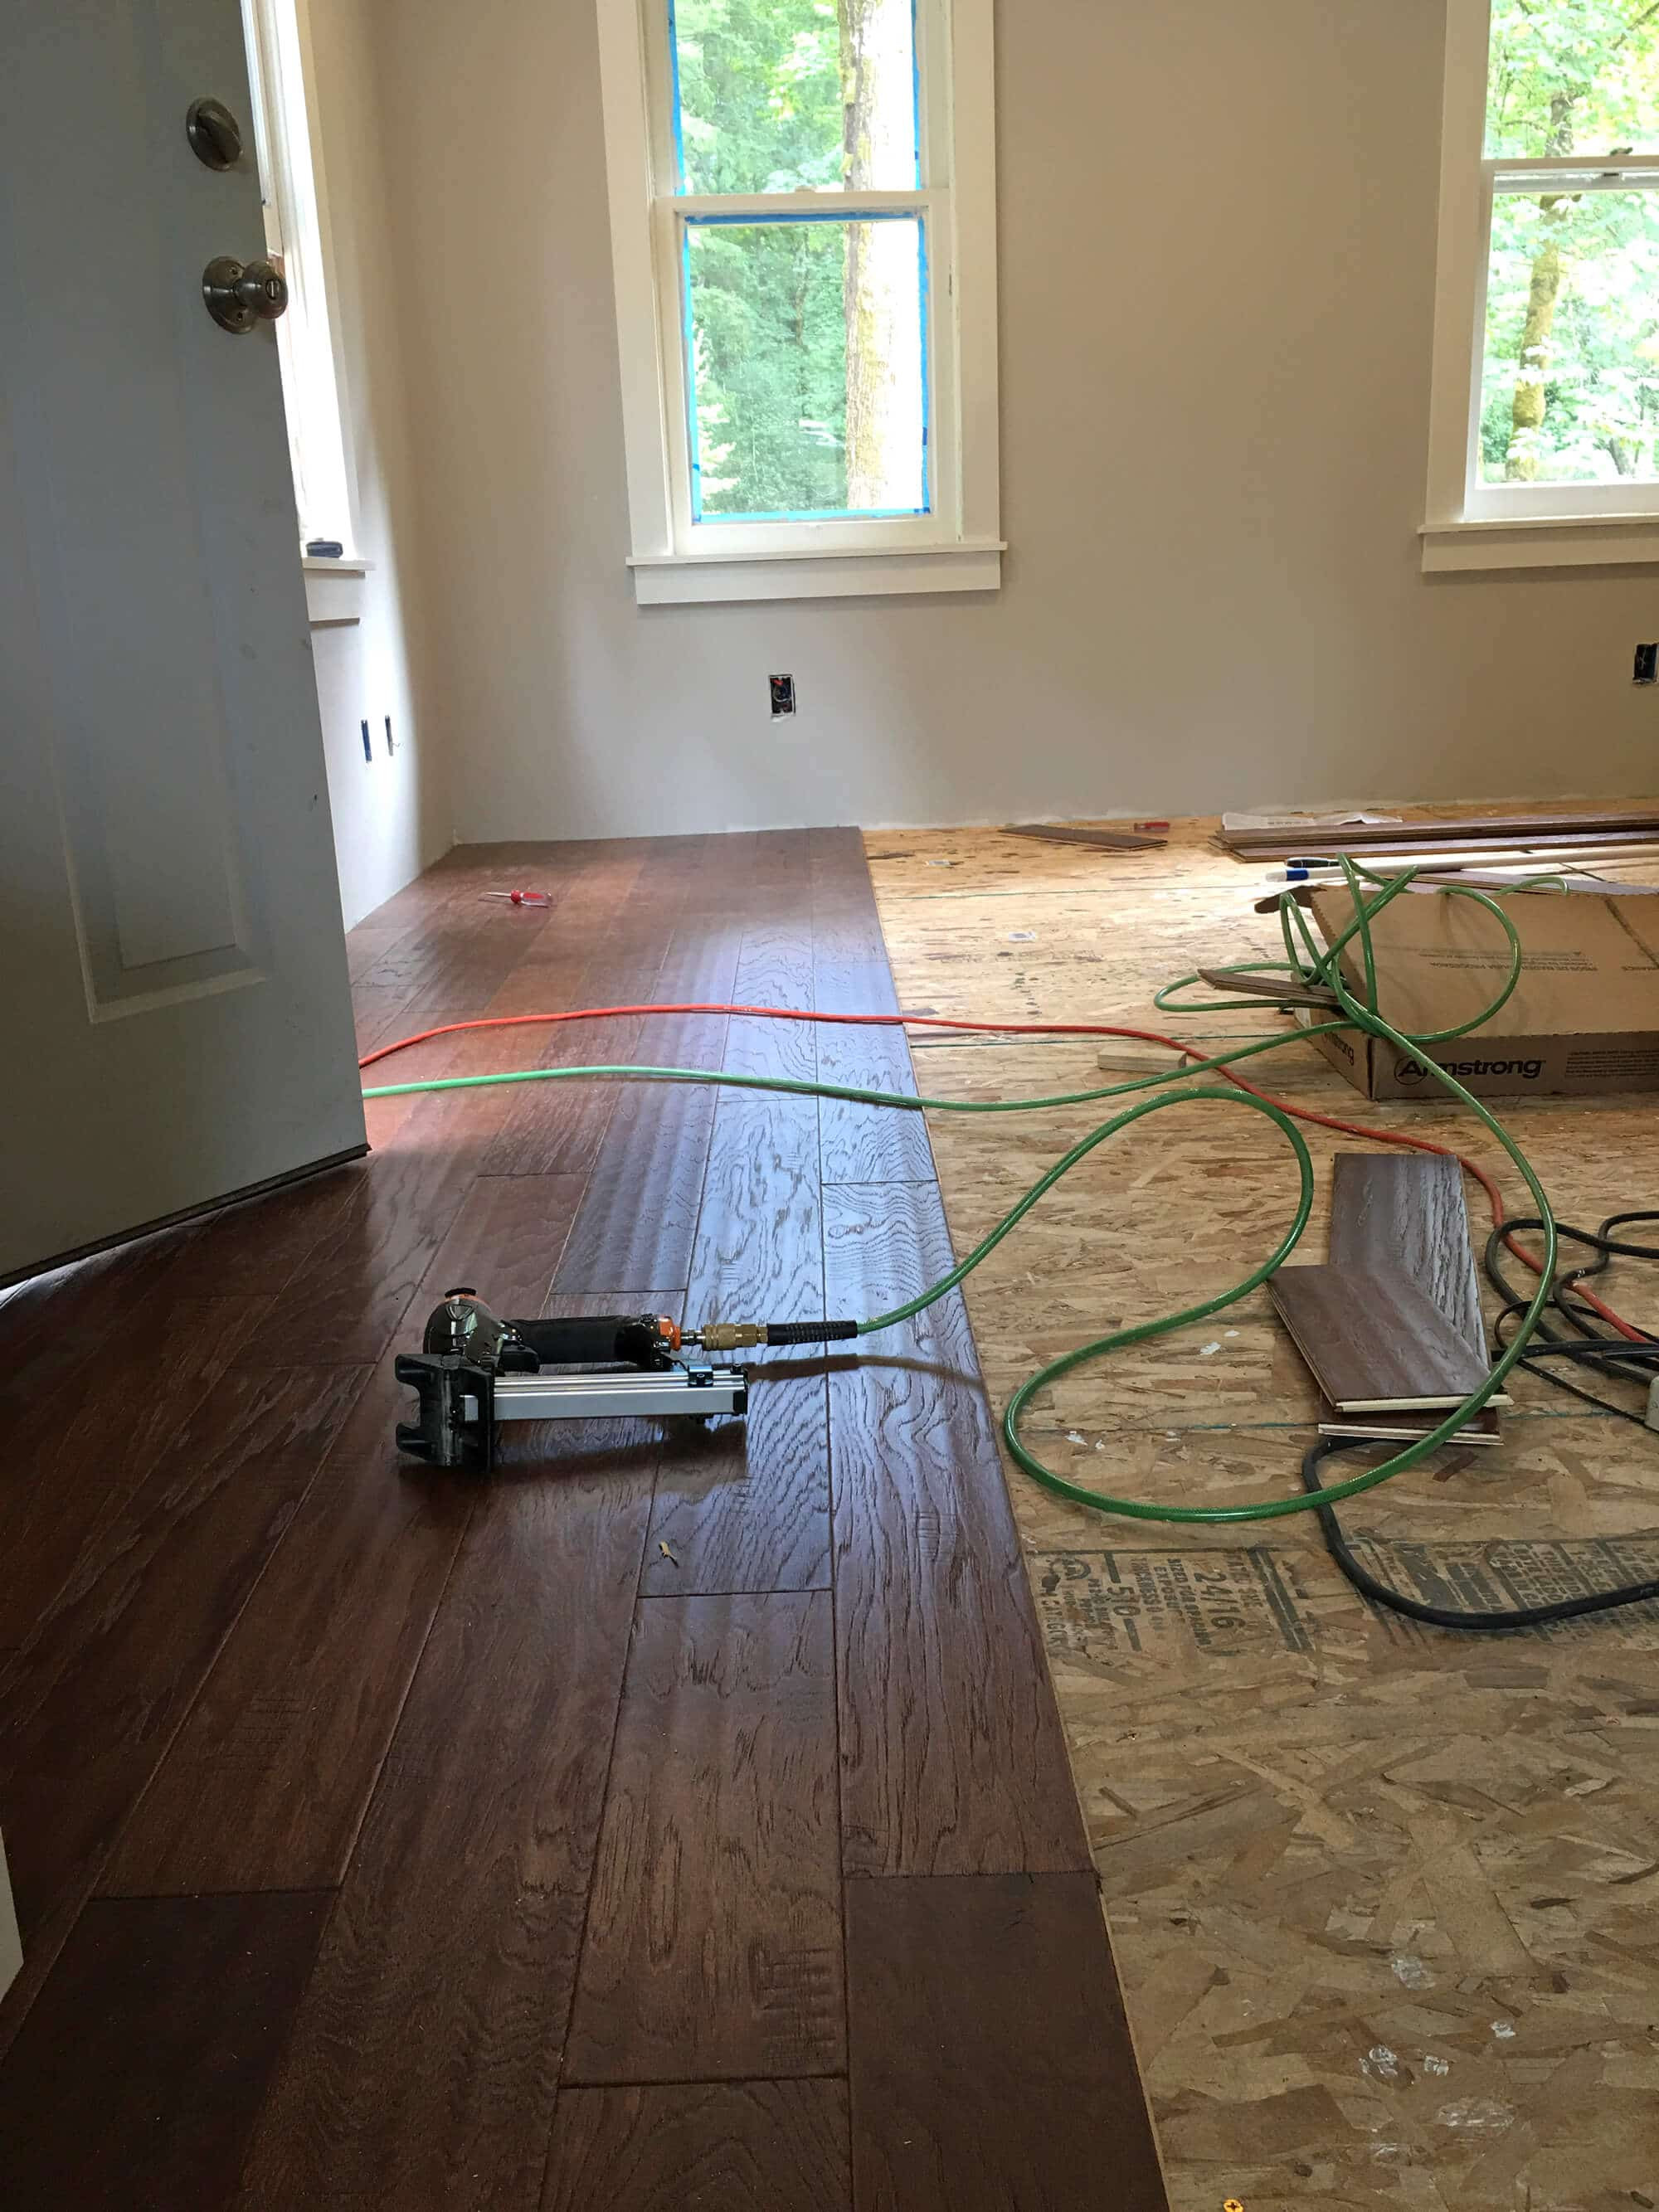 27 Spectacular Hardwood Flooring Over Osb 2024 free download hardwood flooring over osb of the micro dwelling project part 5 flooring the daring gourmet within as for the pattern of the flooring the floor panels come in a mixture of different lengths 